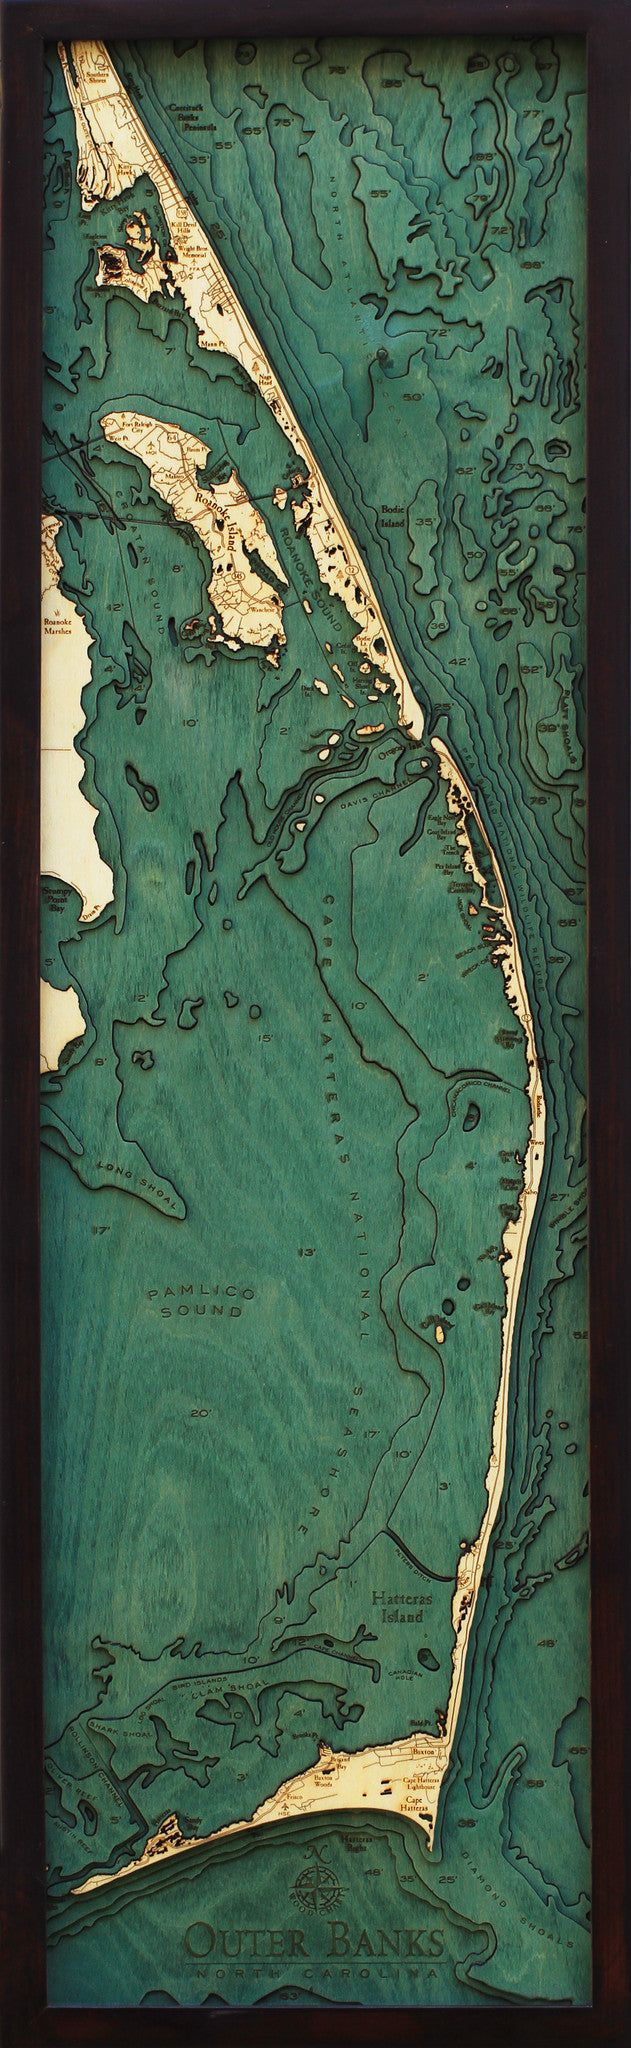 Map of Outer Banks NC 3-D Nautical Wood Chart